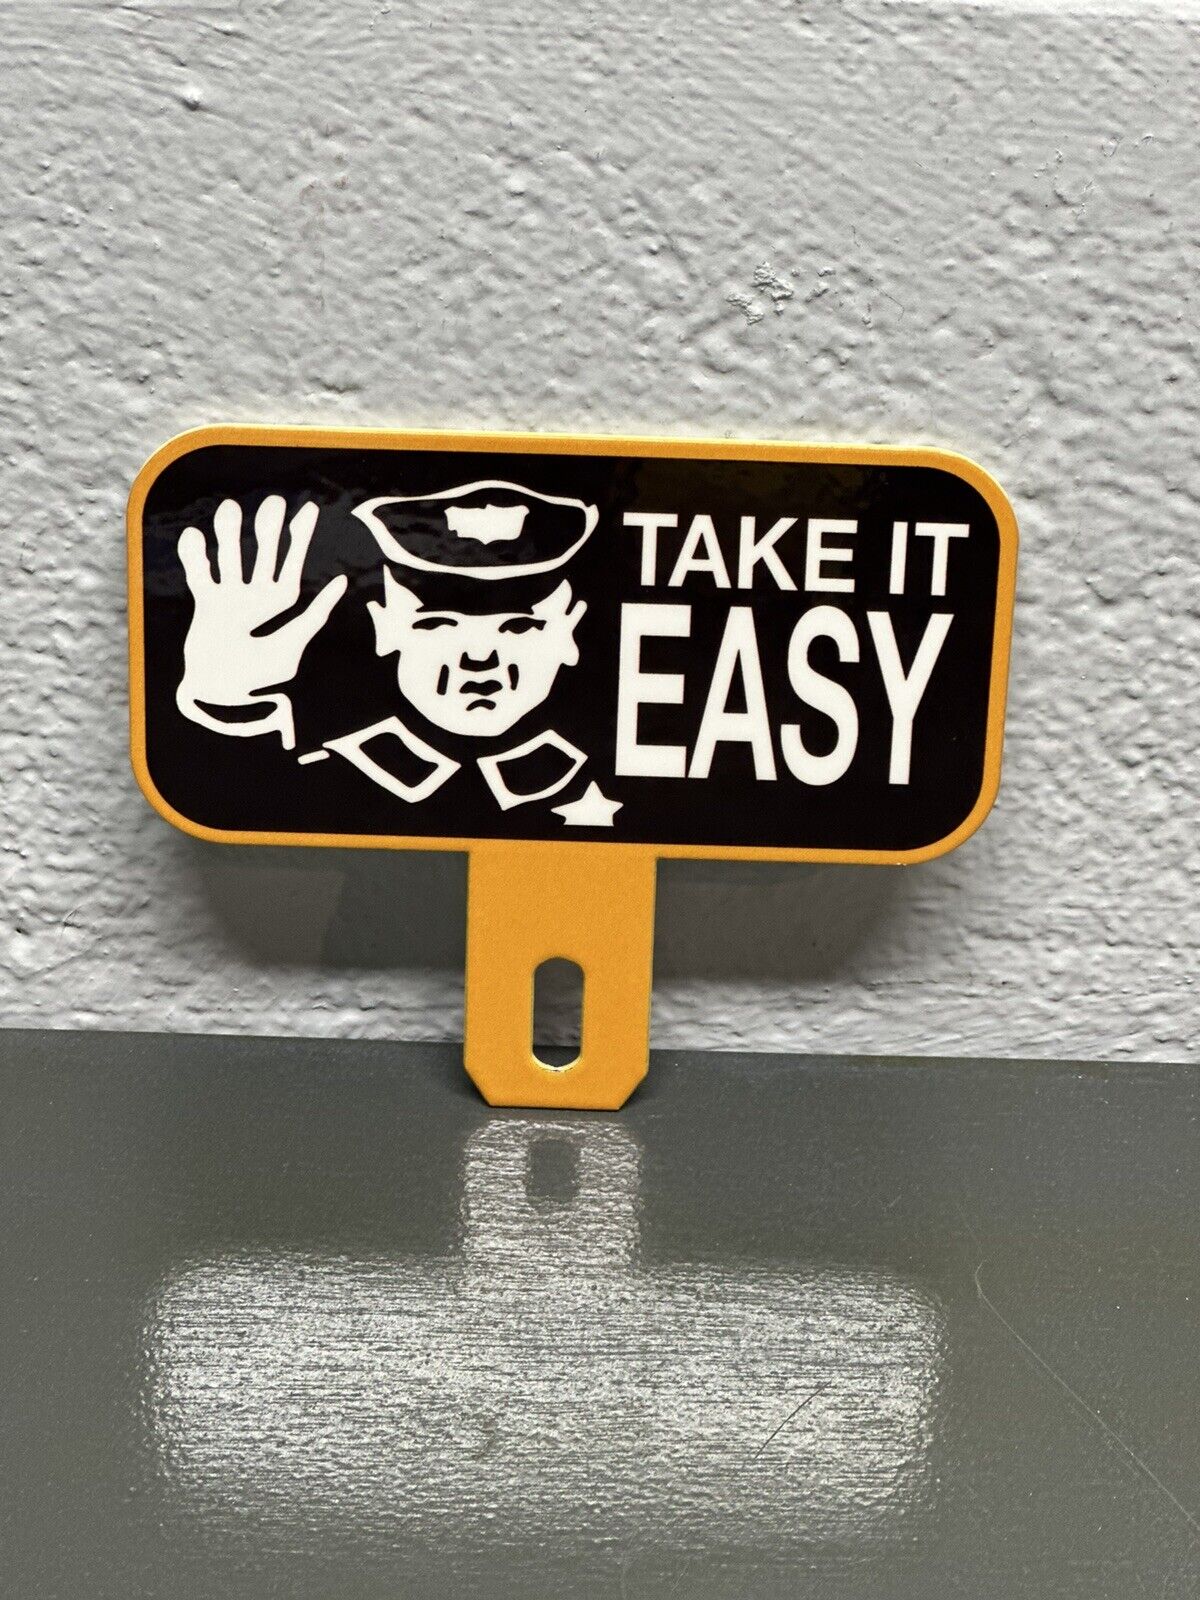 Take It Easy Metal Plate Topper Funny Humor Rat Rod Motorcycle Gas Oil Sign